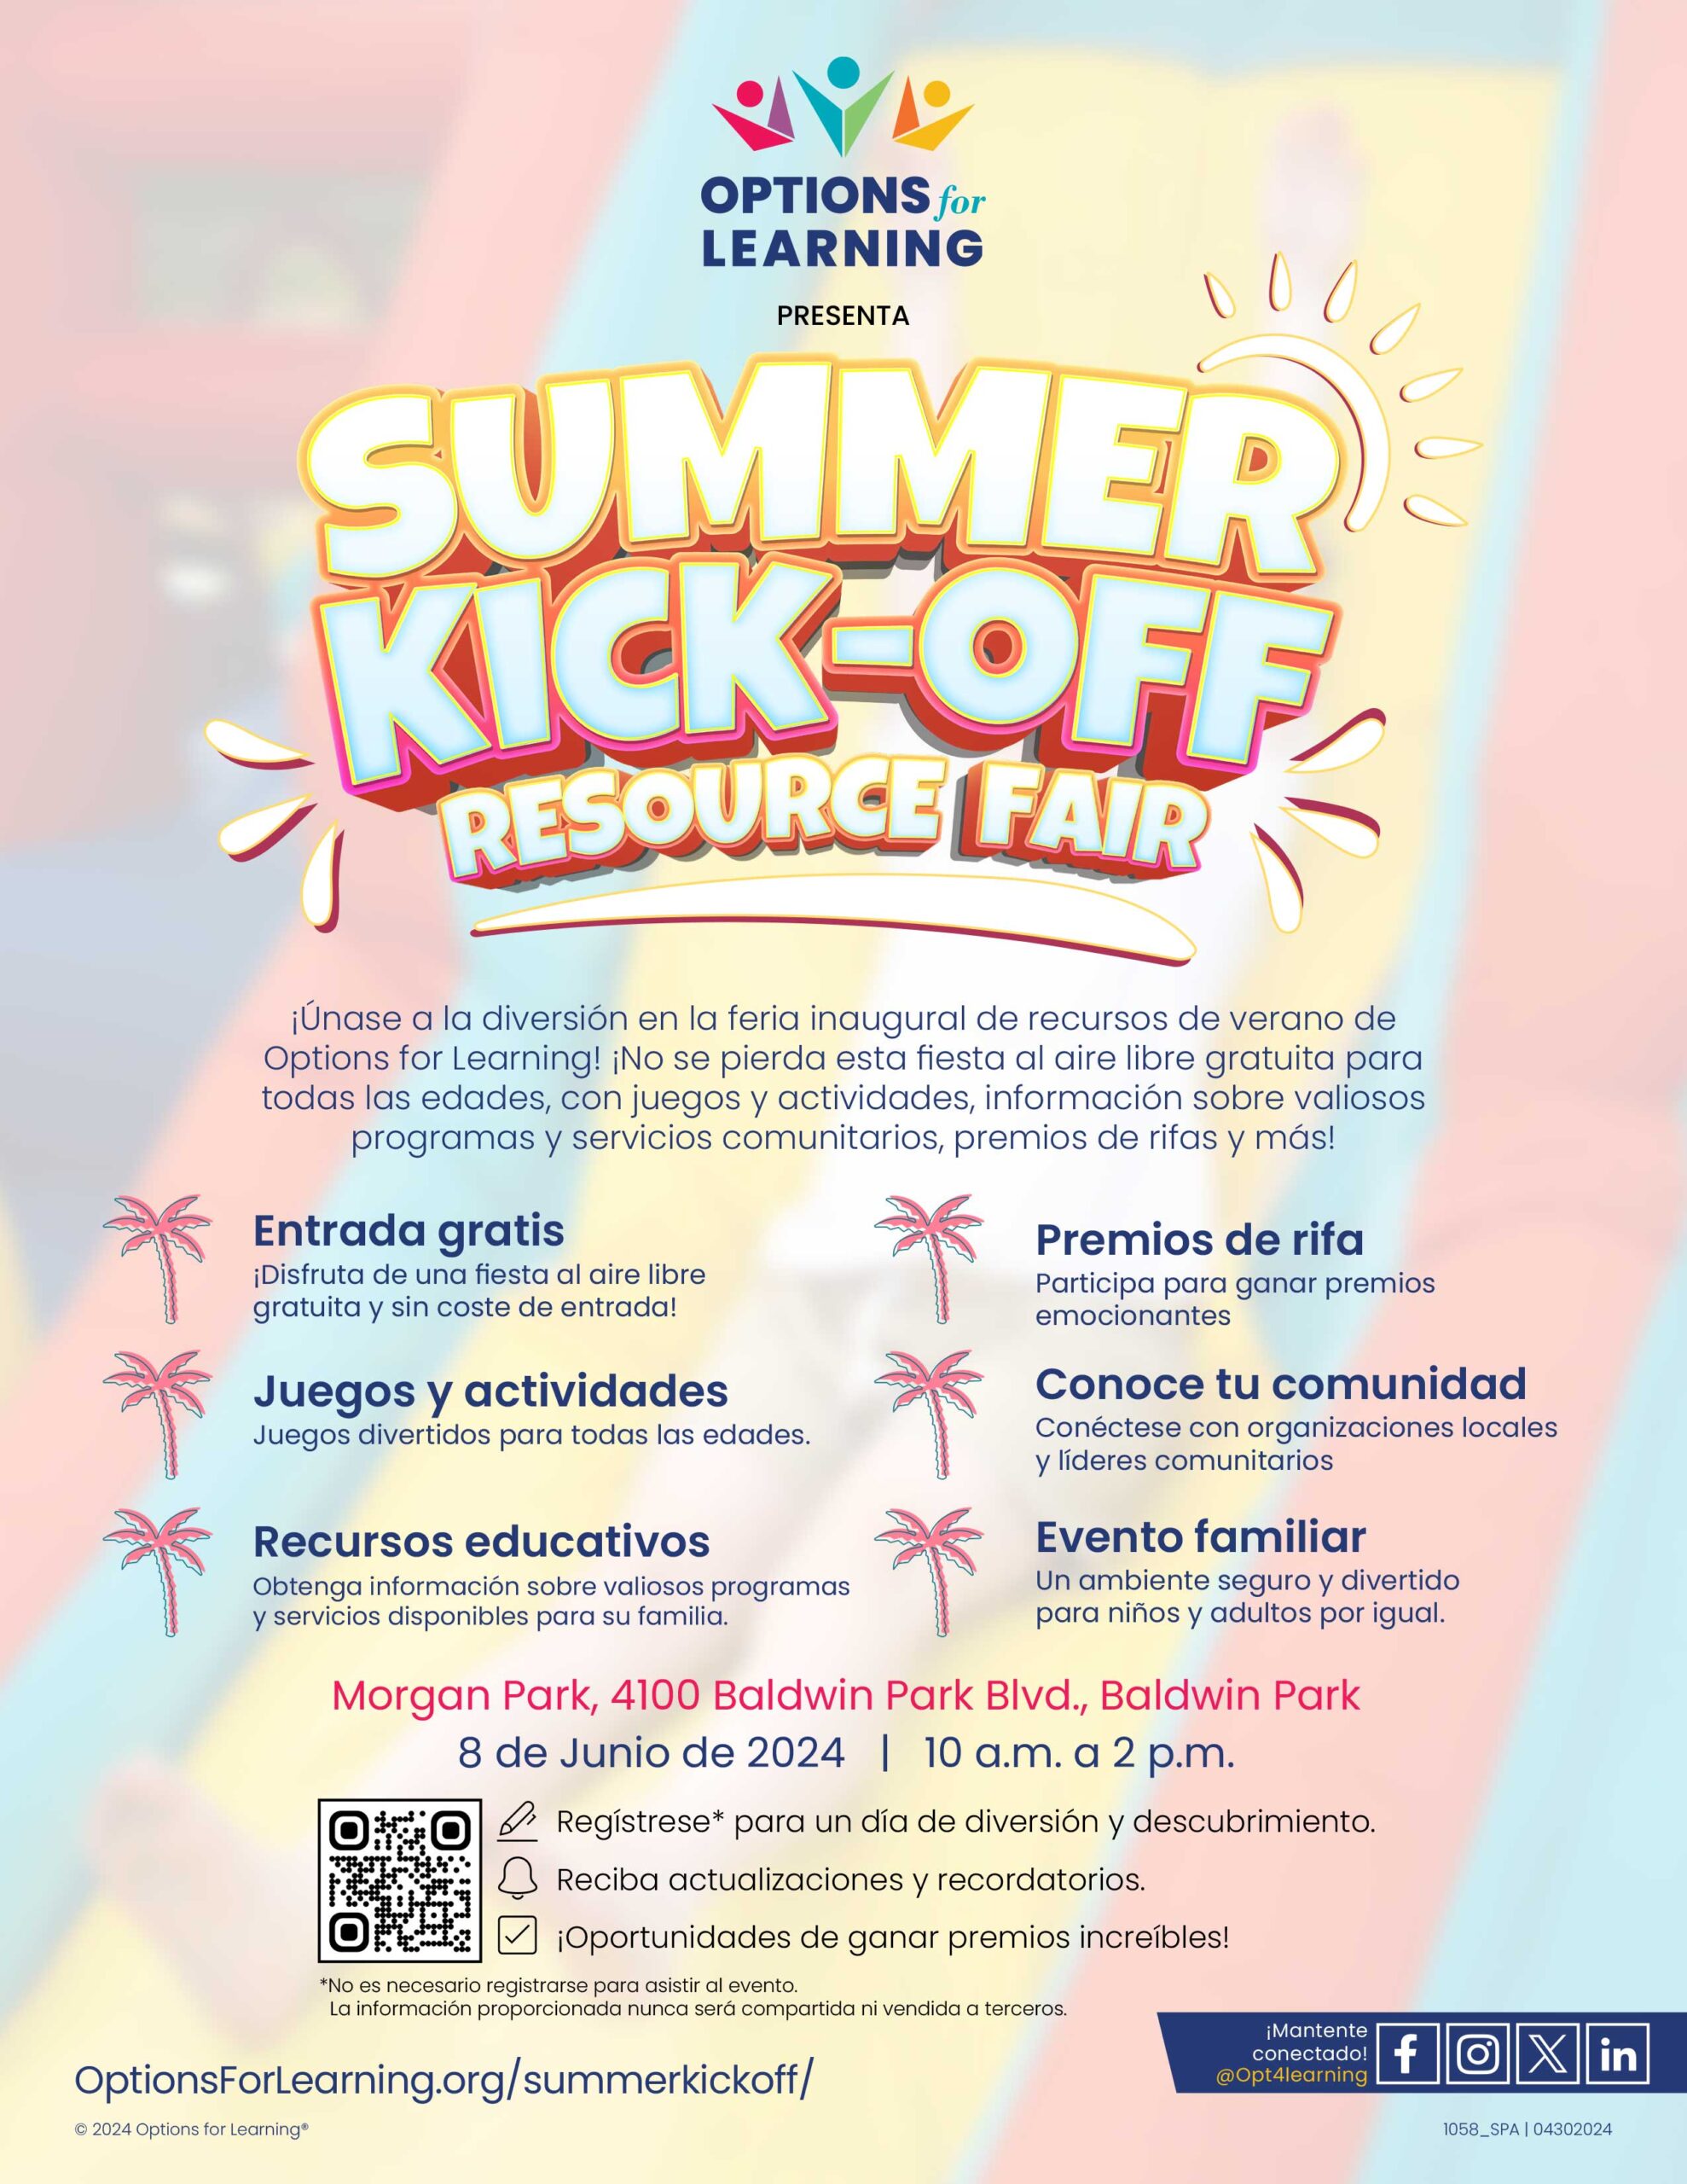 Options for Learning Summer Kick off Resource Fair flyer in Spanish 